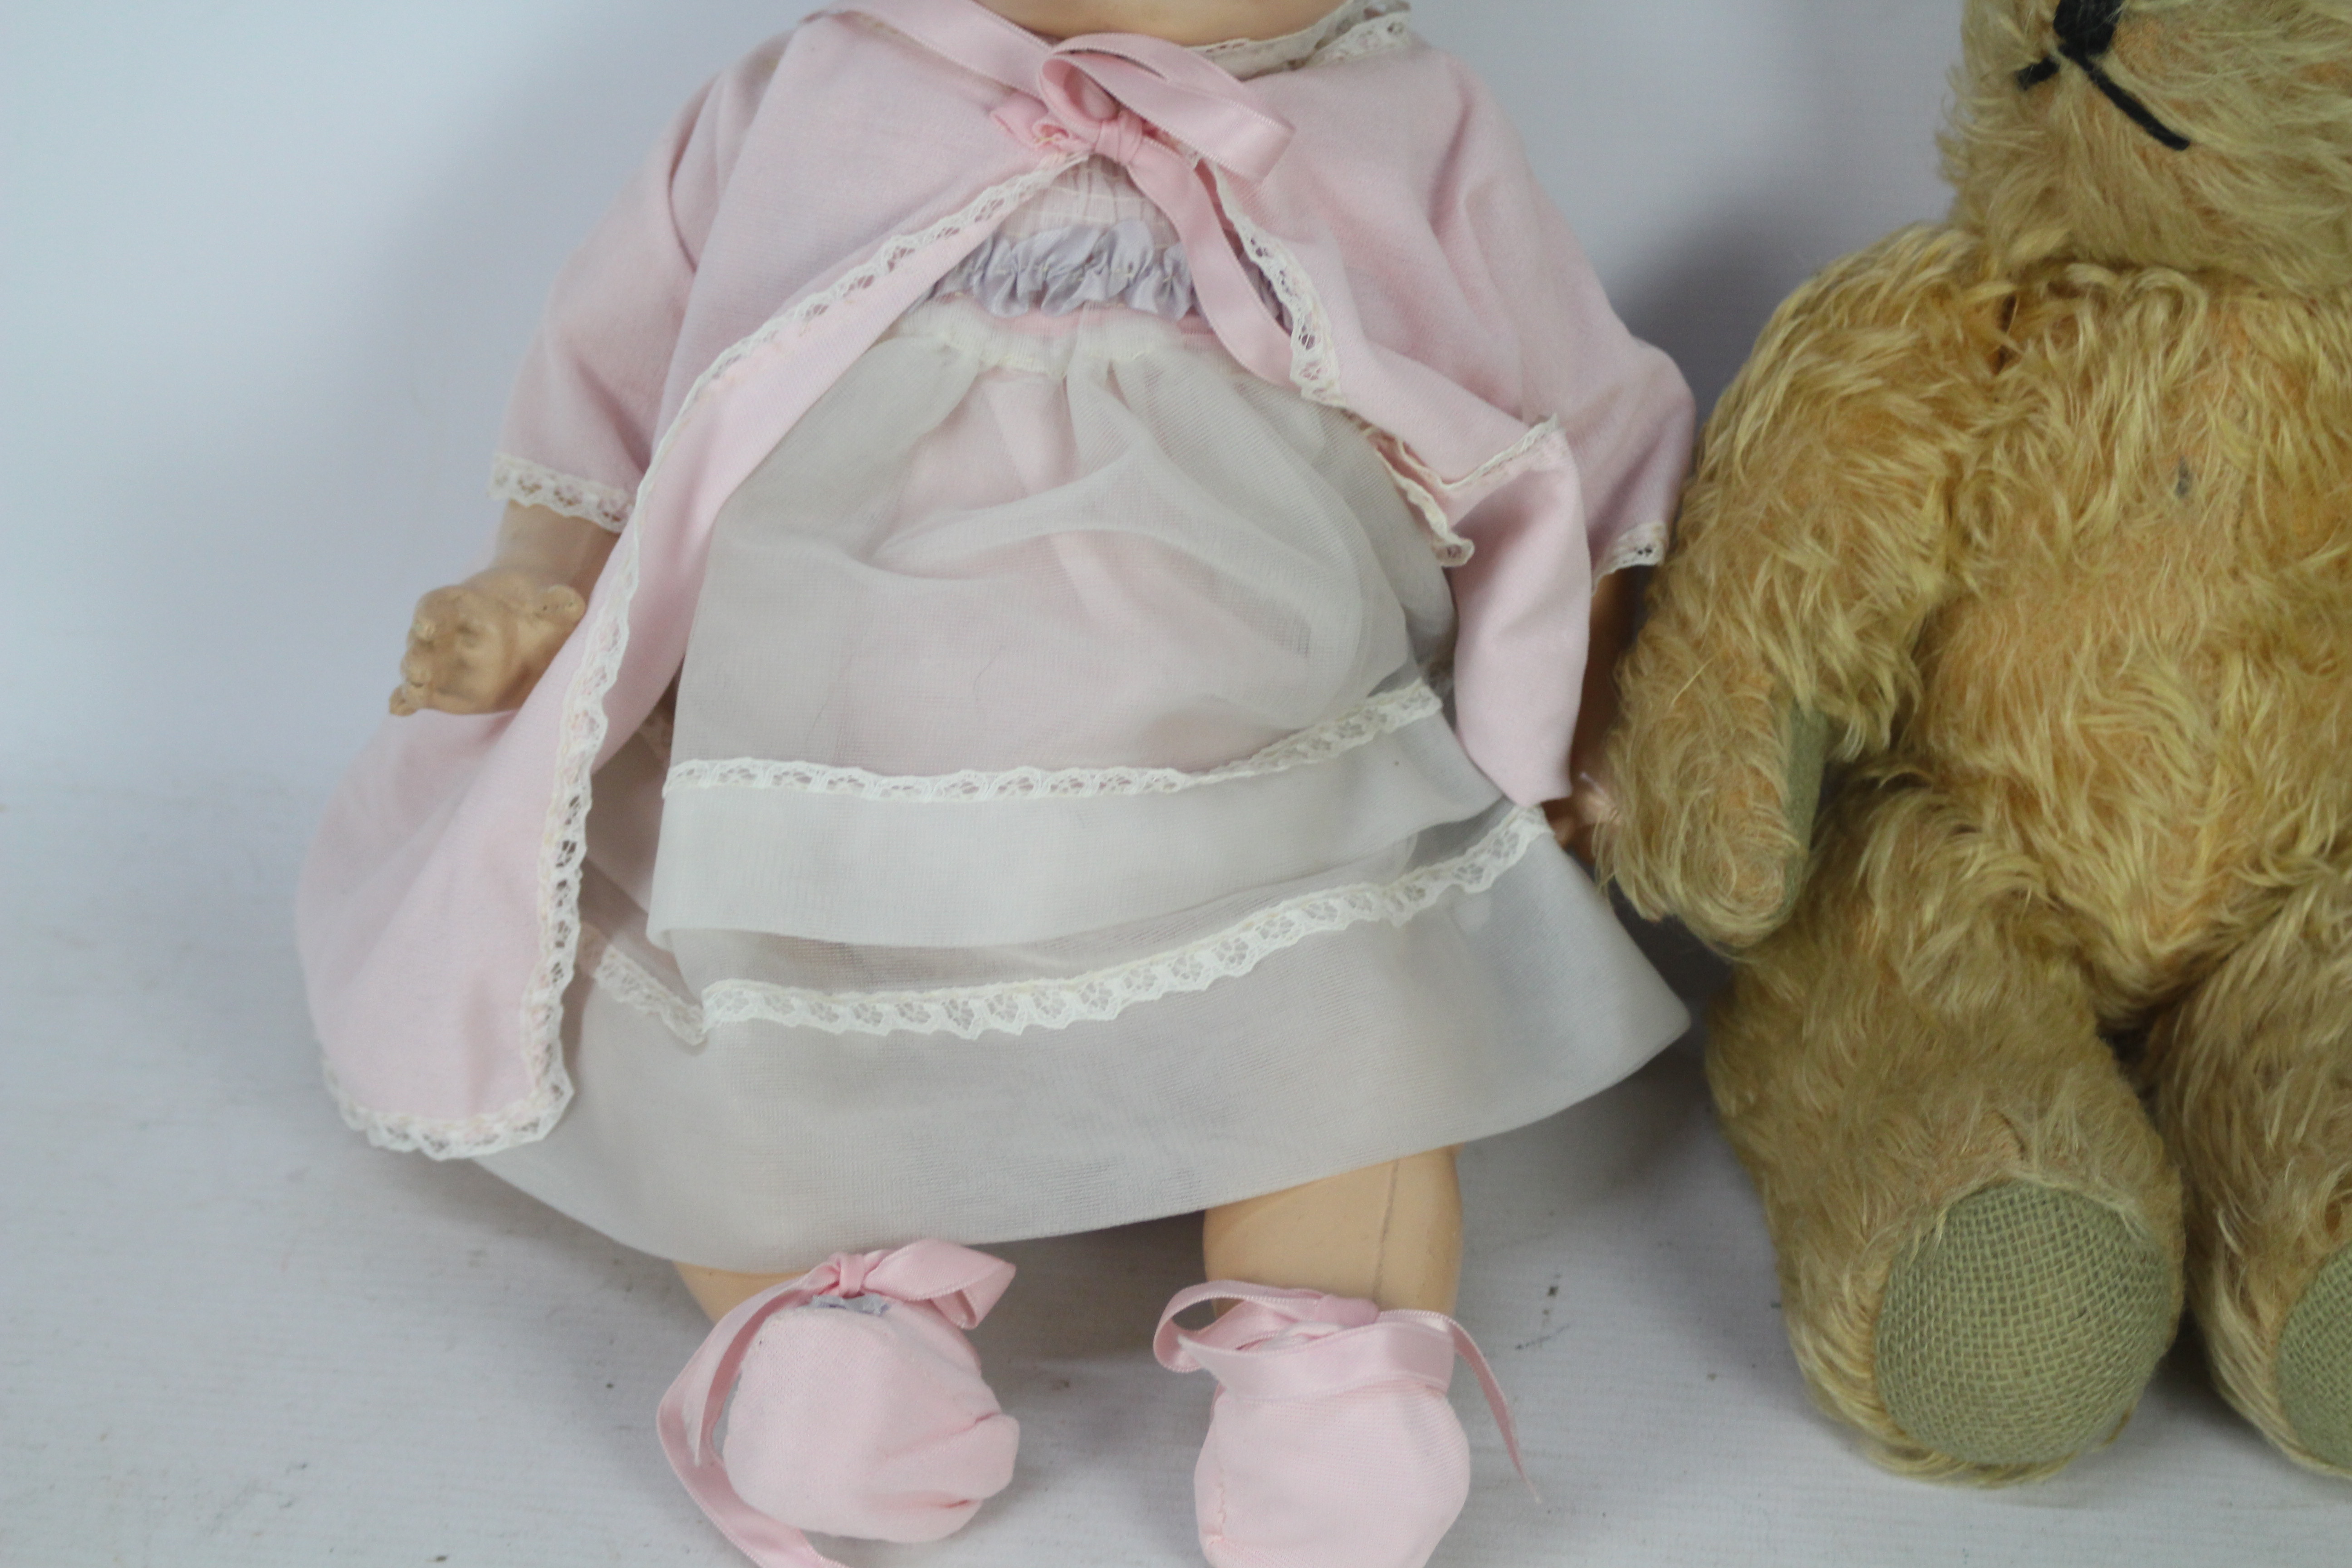 Unknown Maker - A doll and a vintage teddy. - Image 5 of 6